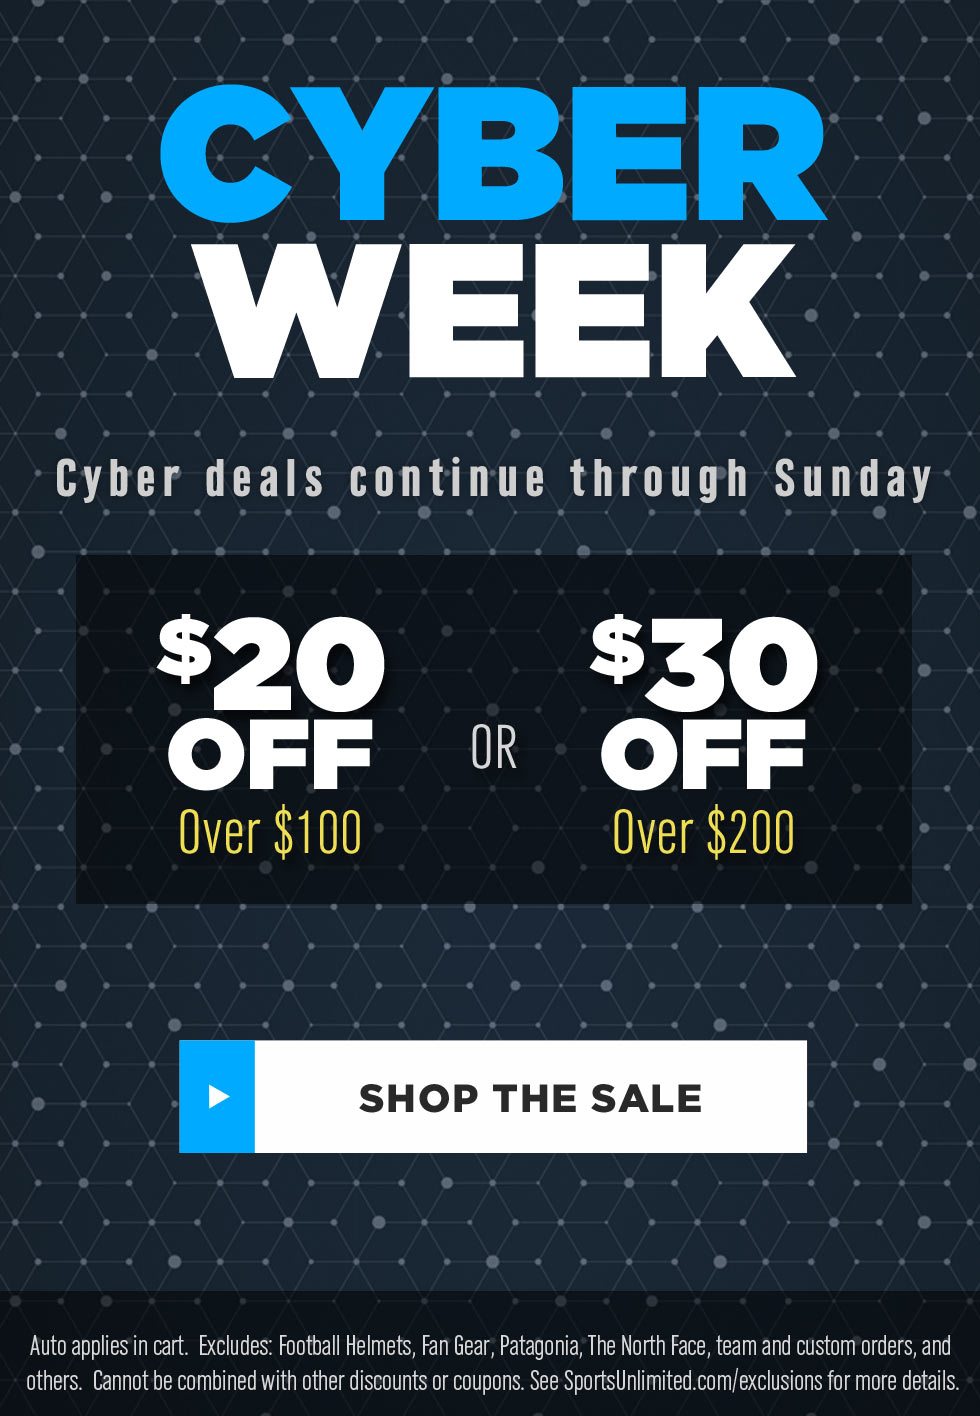 Cyber Week Continues - $20 Off $100 or $30 Off $200ur best deals of the year: $15, $20, or $30 off (exclusions apply) - SHOP NOW